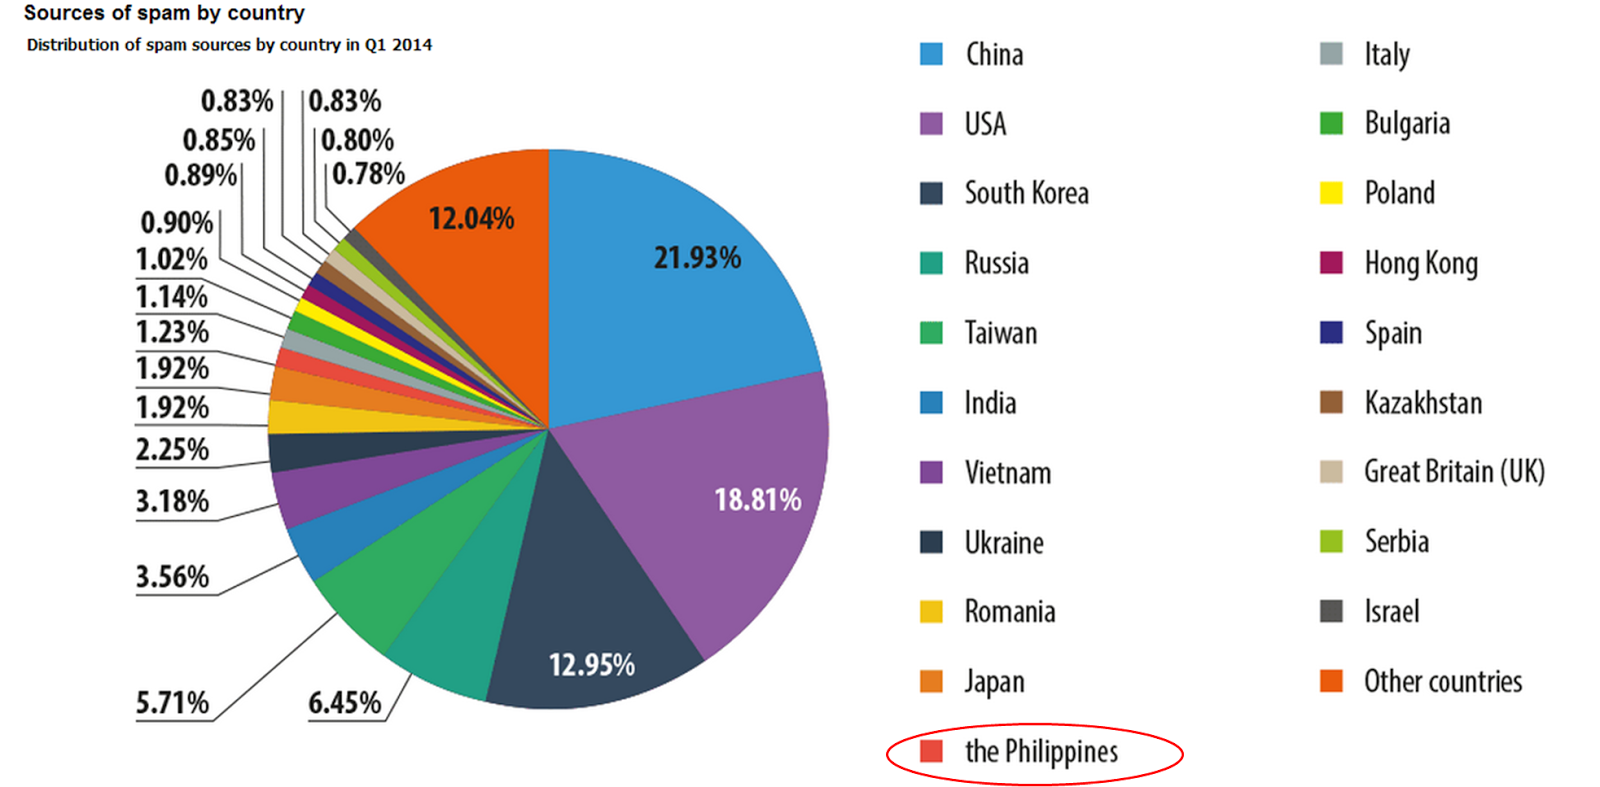 Sources of spam by country